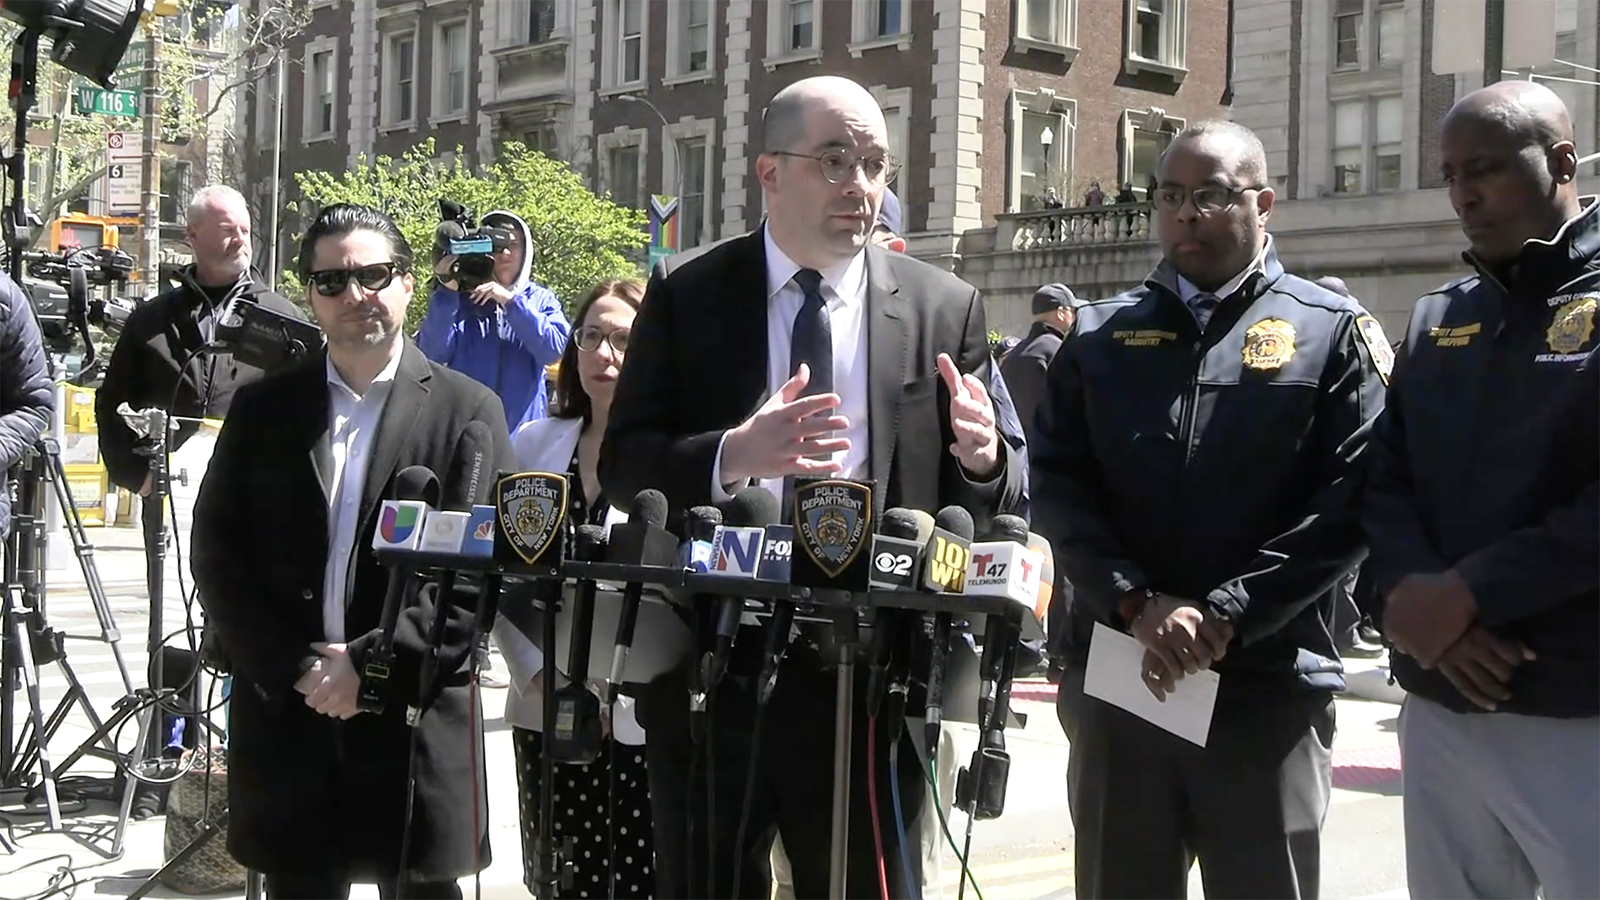 NYPD Deputy Commissioner of Legal Matters Michael Gerber during a presser today in front of Columbia University.